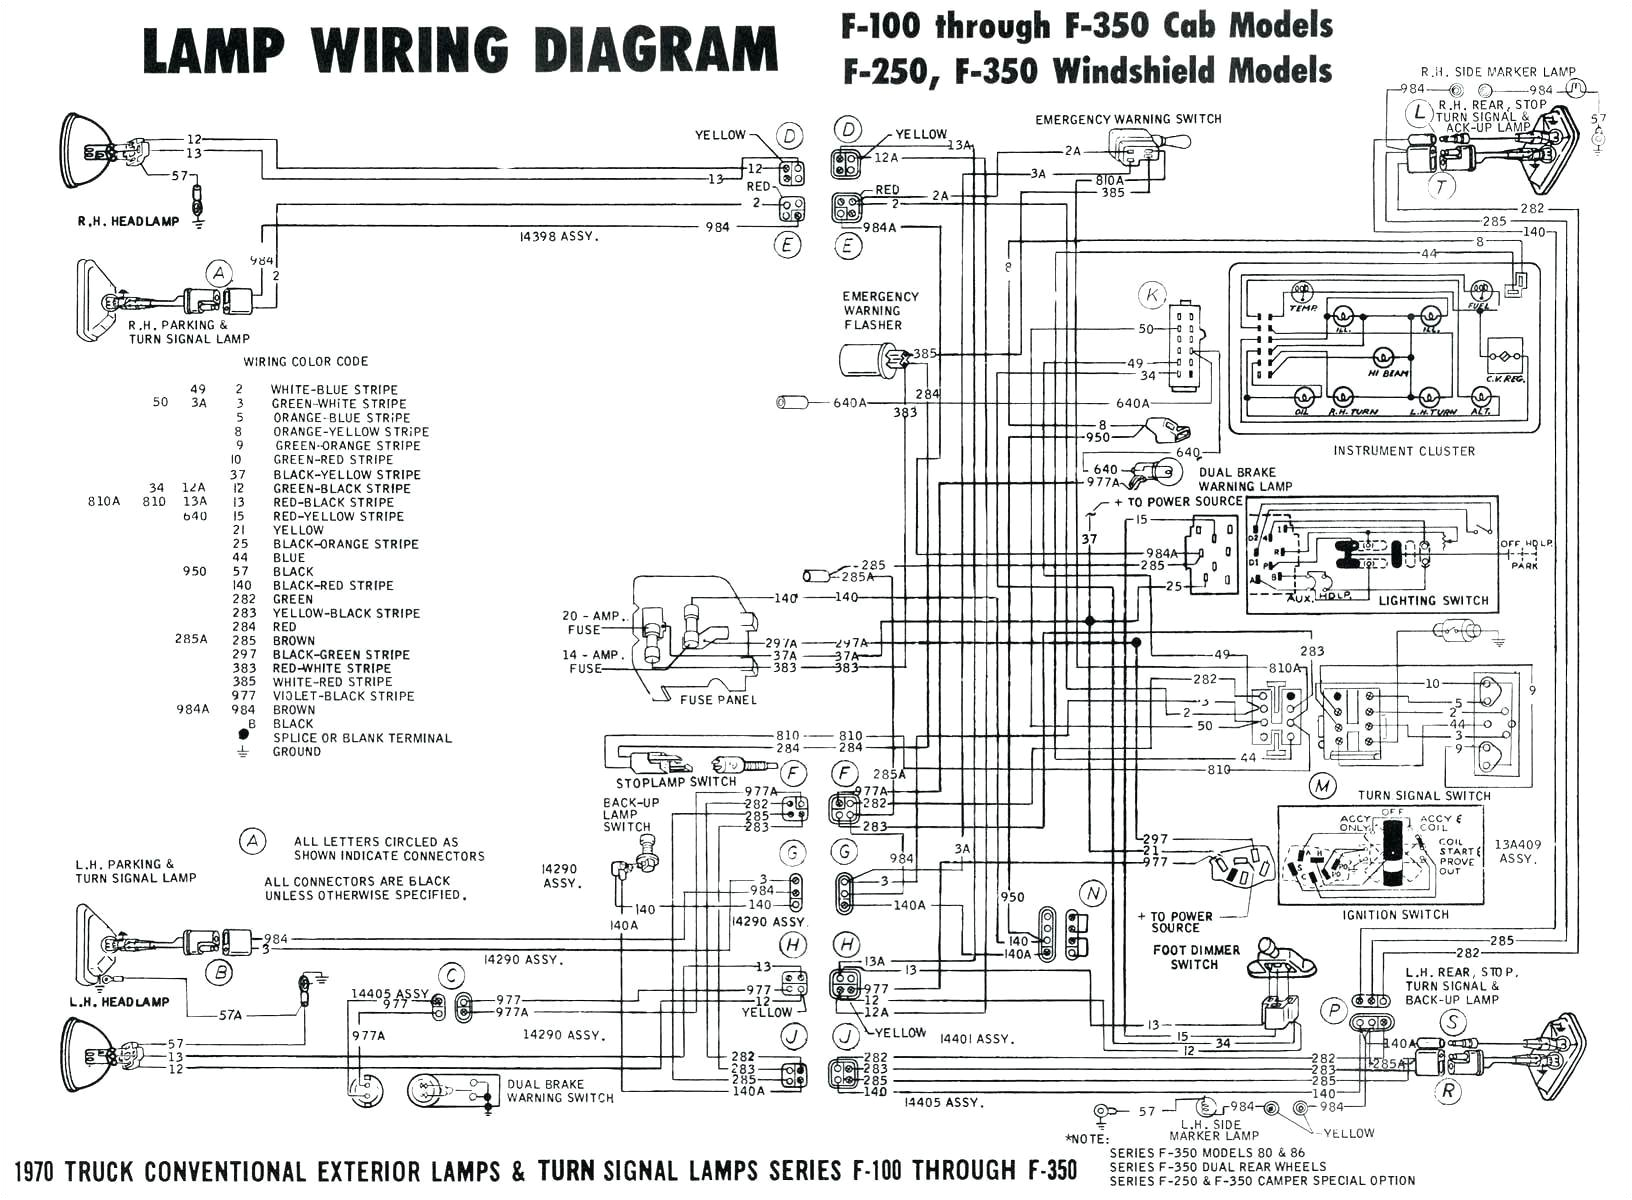 2001 ford ranger dome light unique 2000 ford ranger dome light wiring diagram free download wiring of 2001 ford ranger dome light jpg